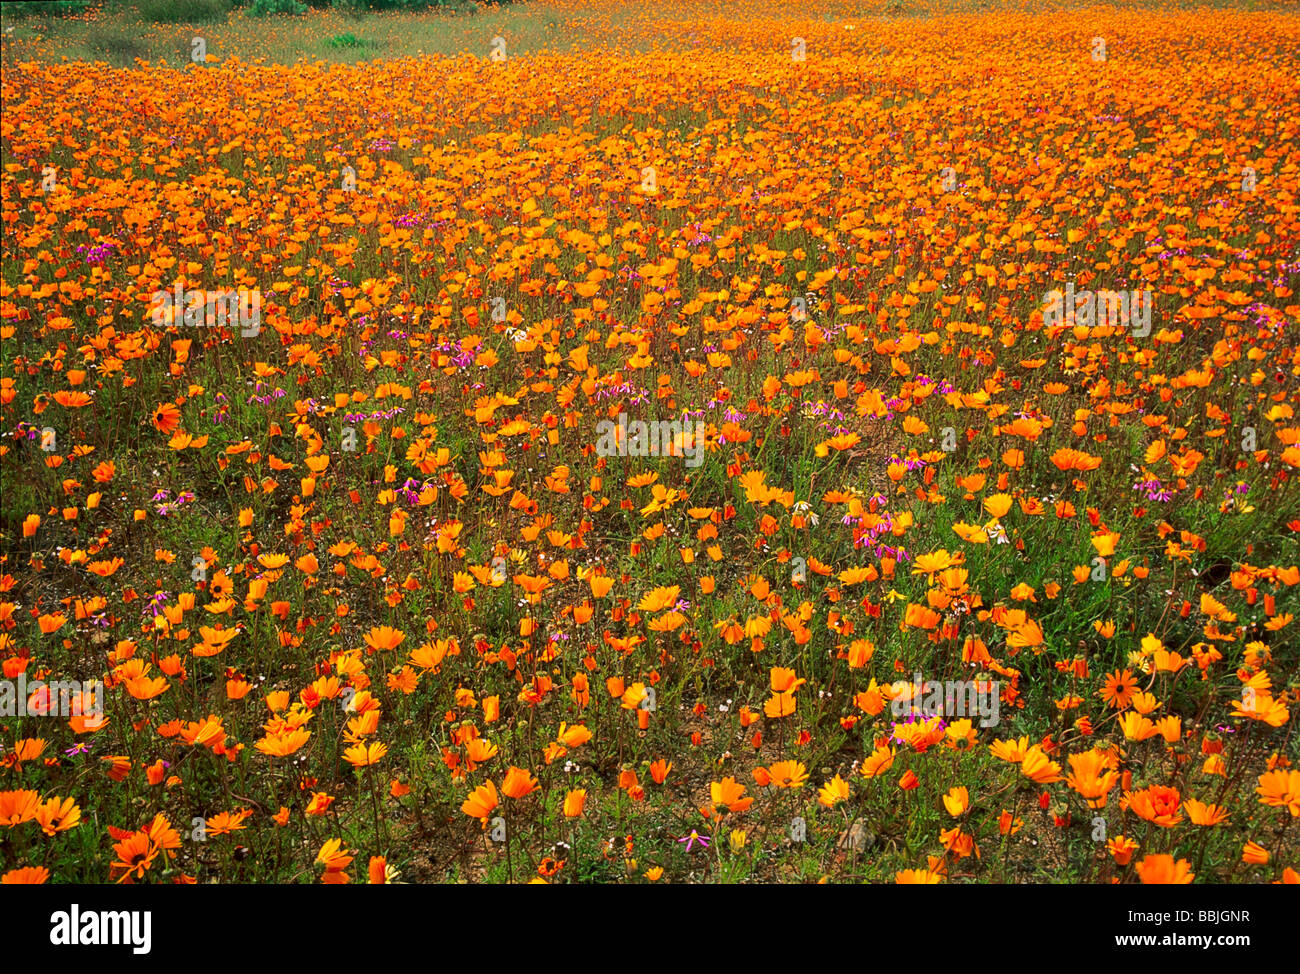 Orange namaqualand daisies dominate meadow wildflower mix at the Skilpad Wildflower Reserve. Stock Photo